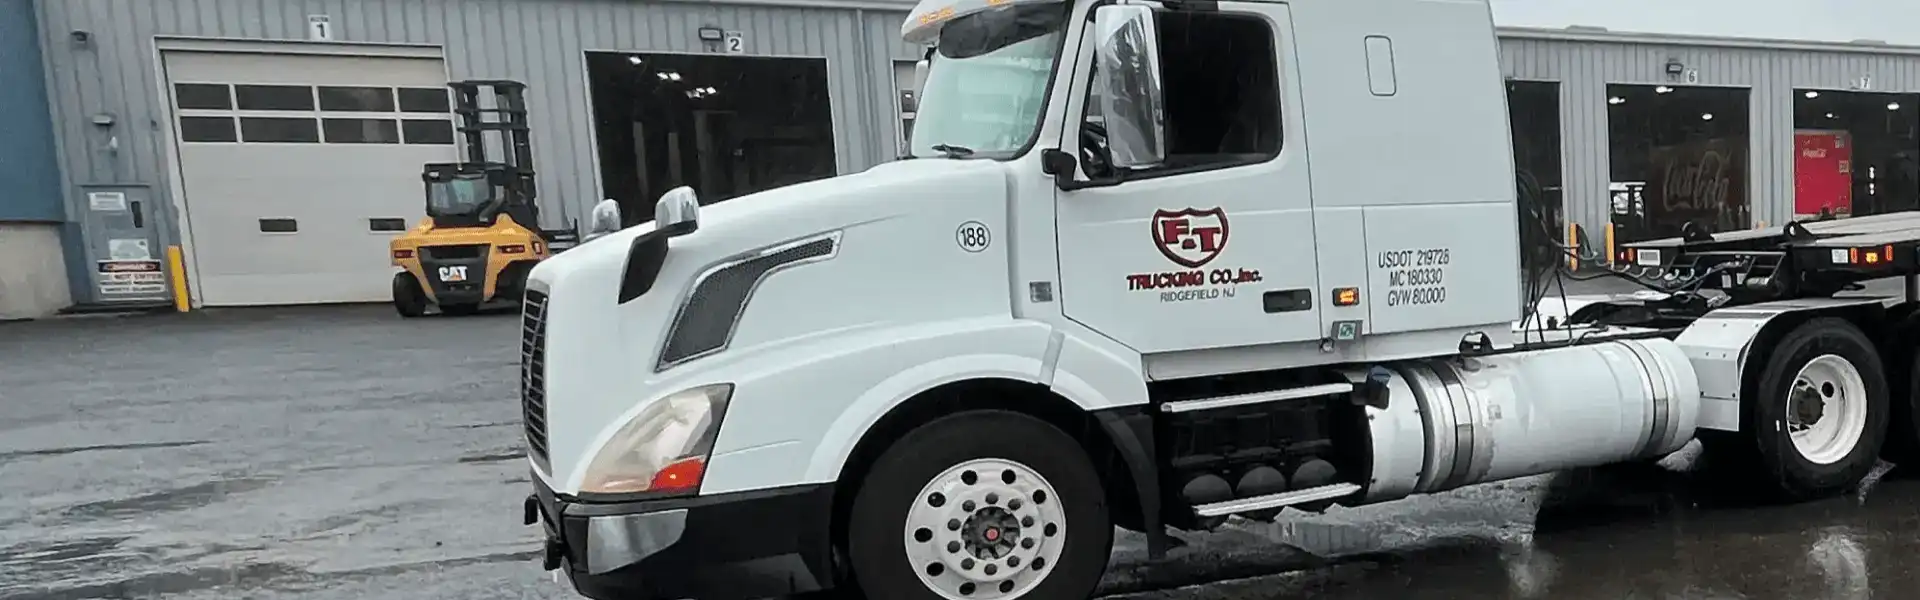 A white truck with the company logo on it.